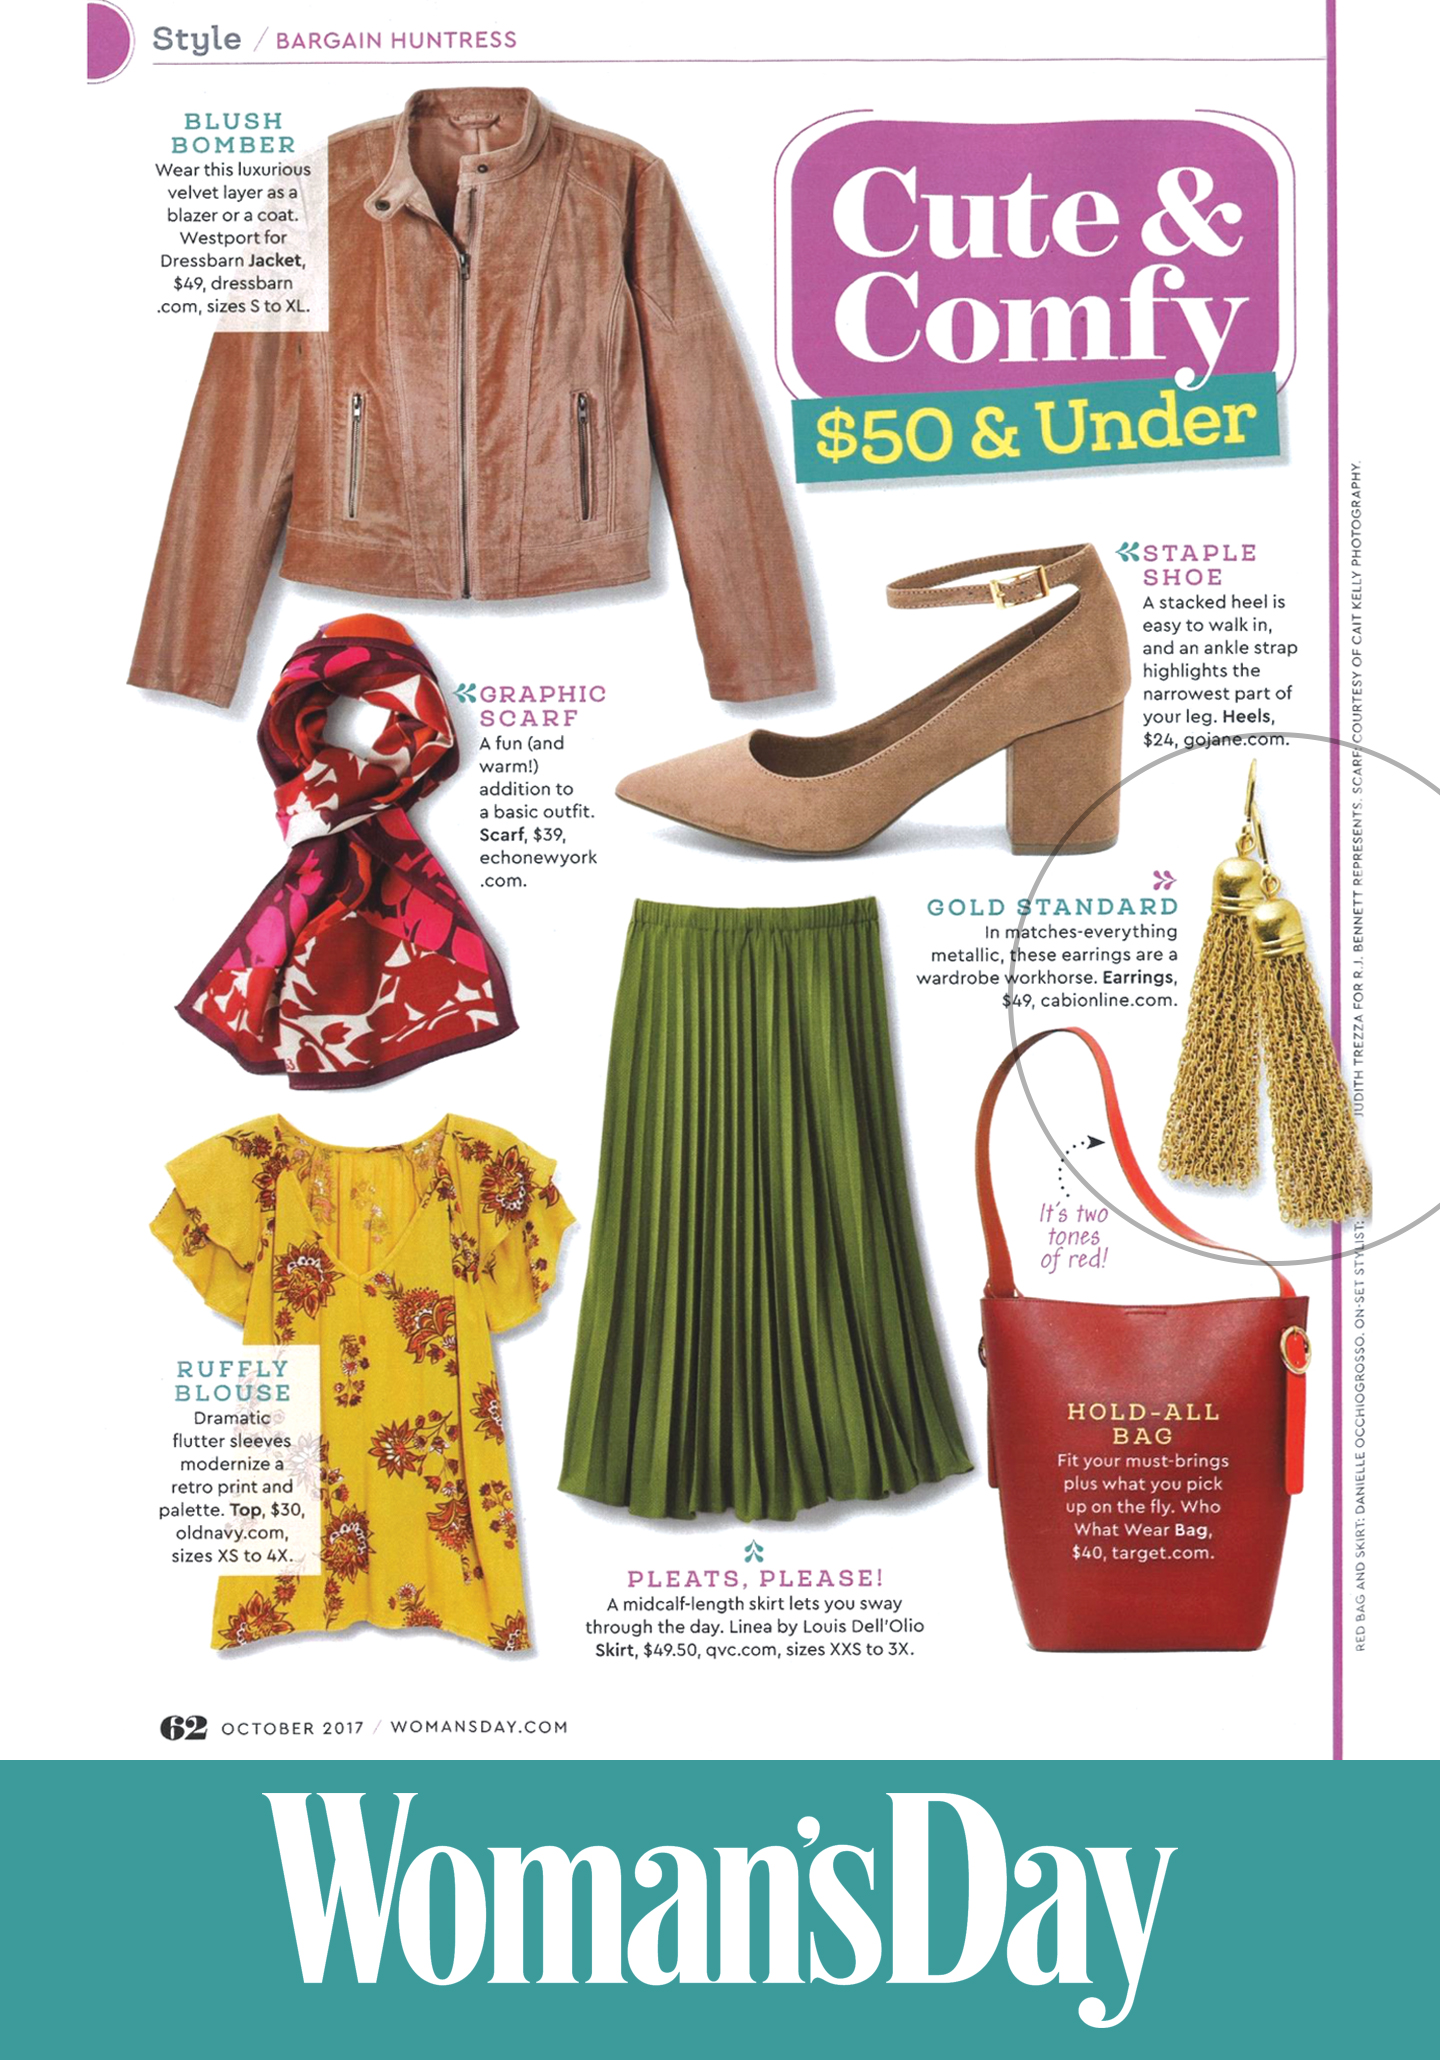 Spotted in Woman’s Day: cabi’s Fall 2017 Flapper Earrings